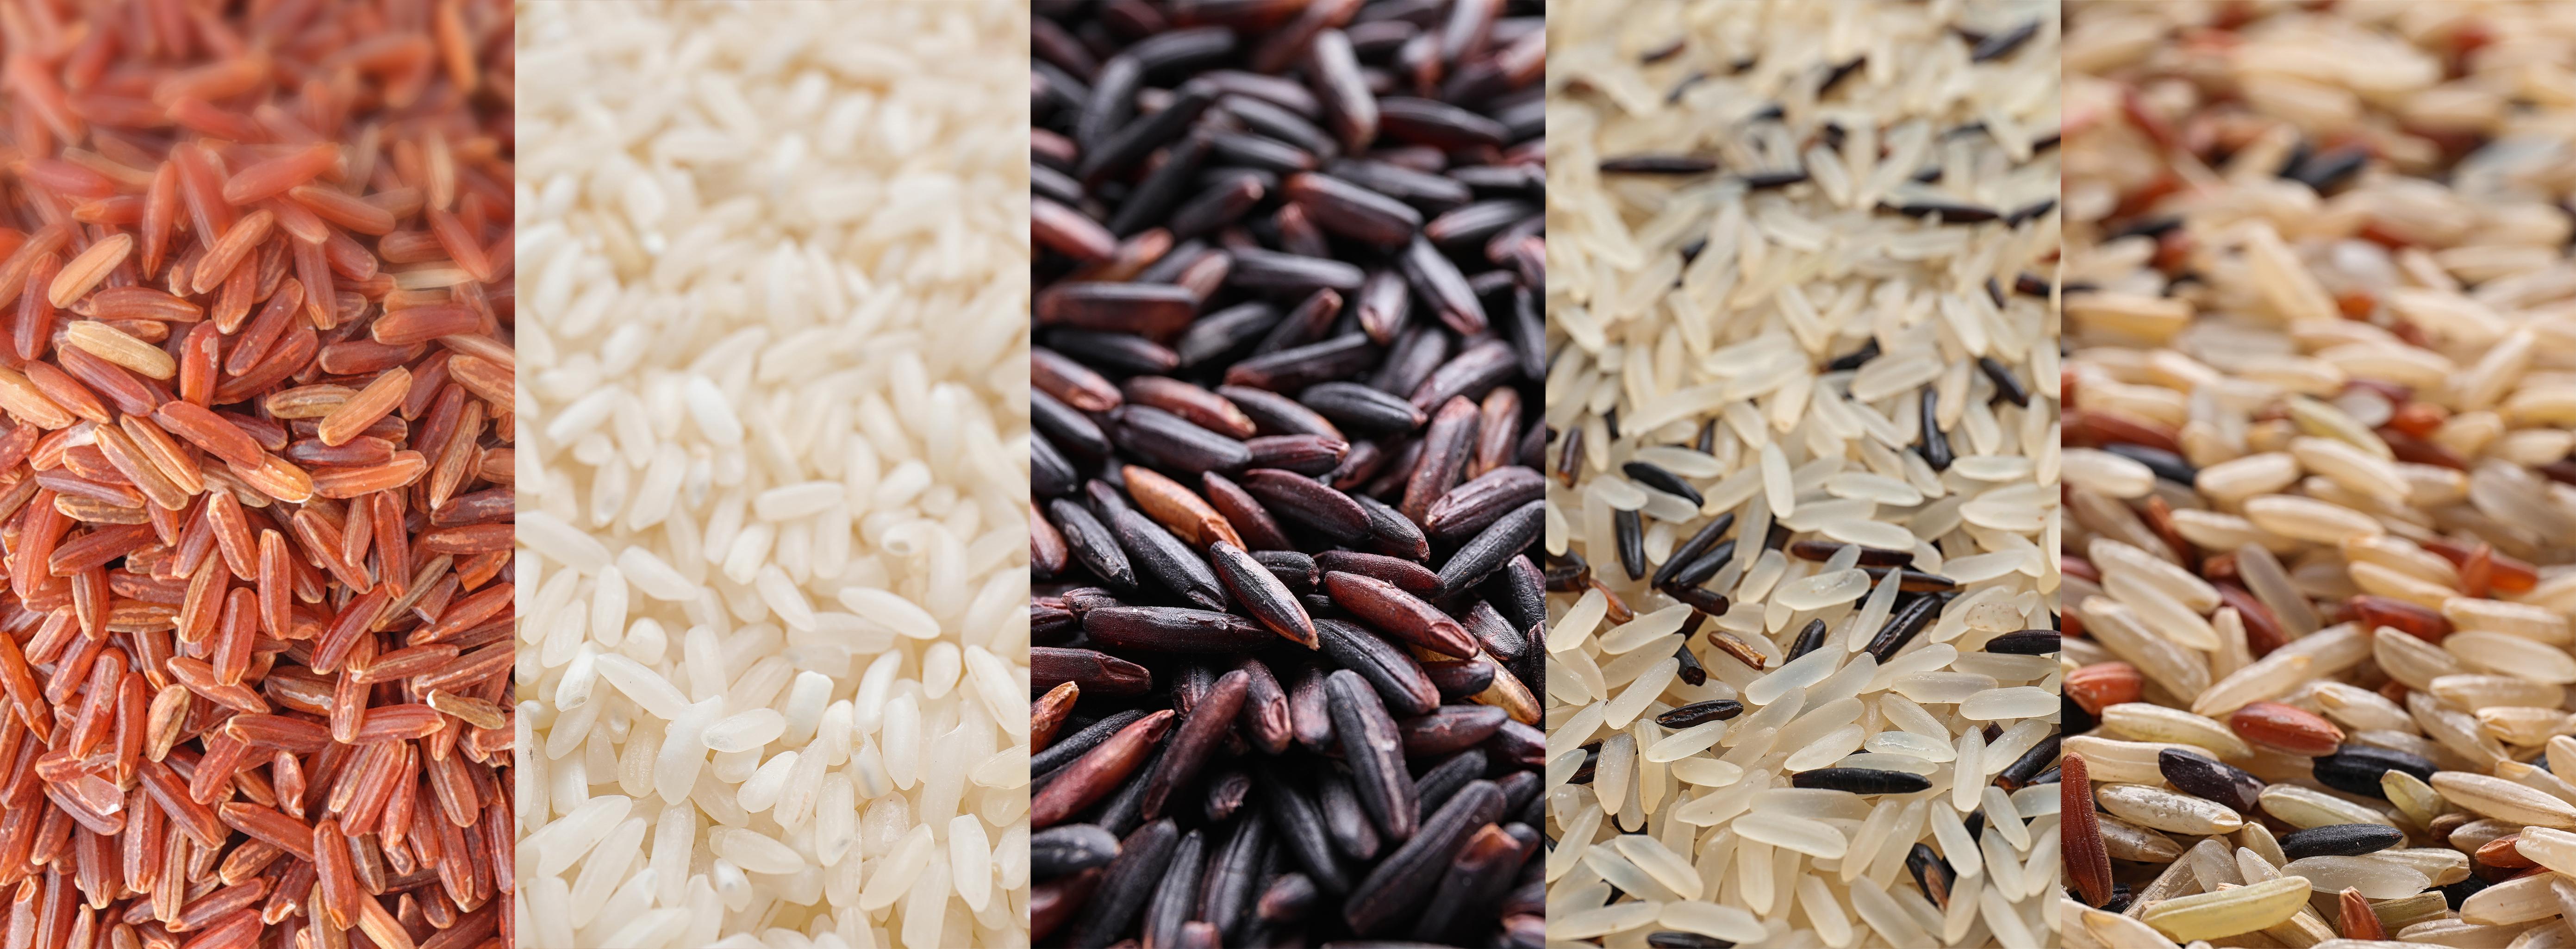 A variety of different rice - -white, red, brown, long grain (Shutterstock -- LW rights)